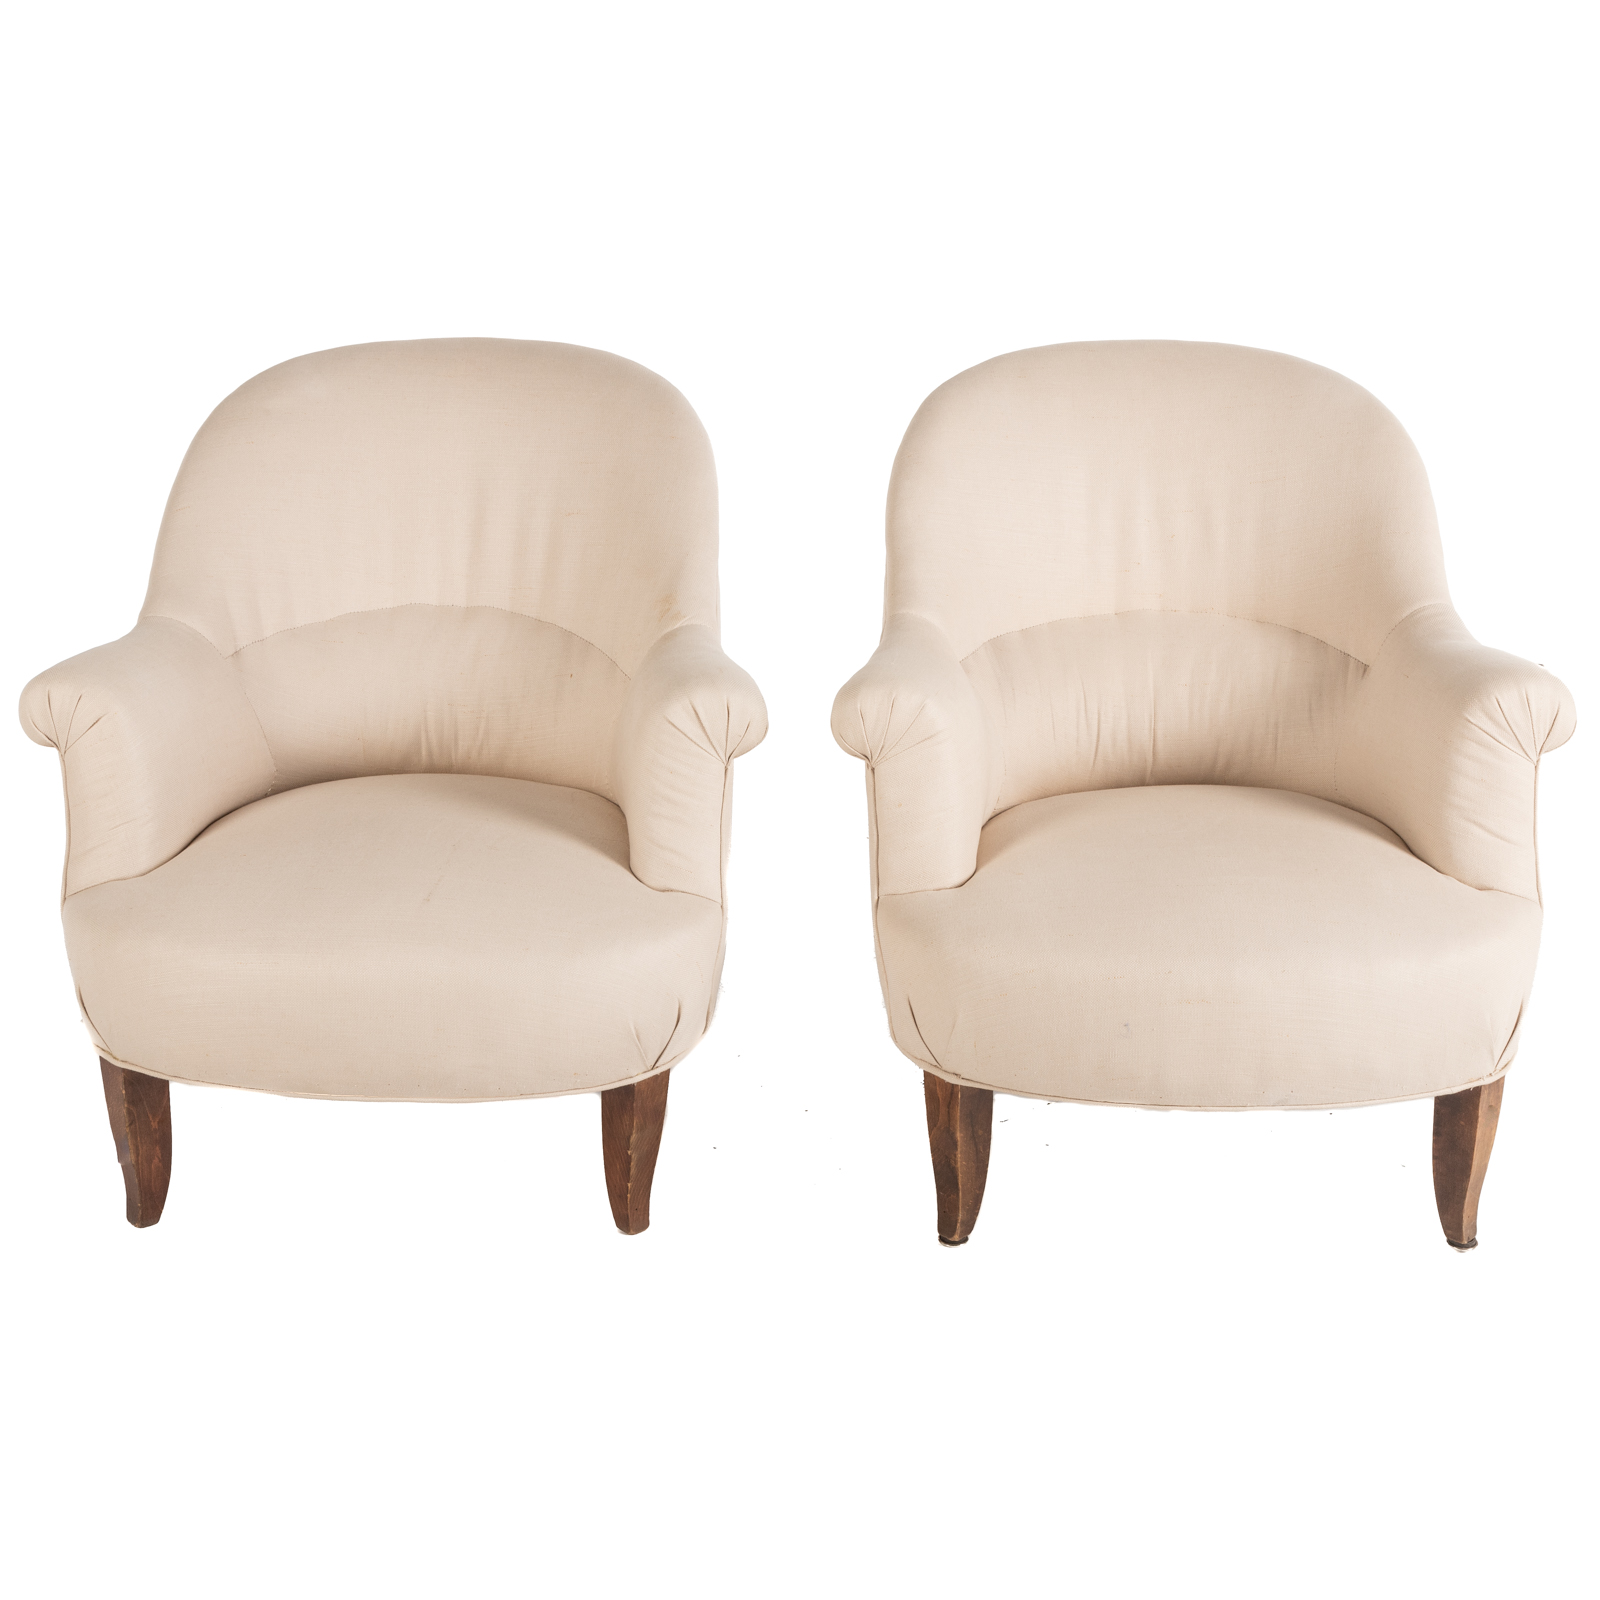 LE STYLE PAIR OF UPHOLSTERED CHAIRS 3b2a0b